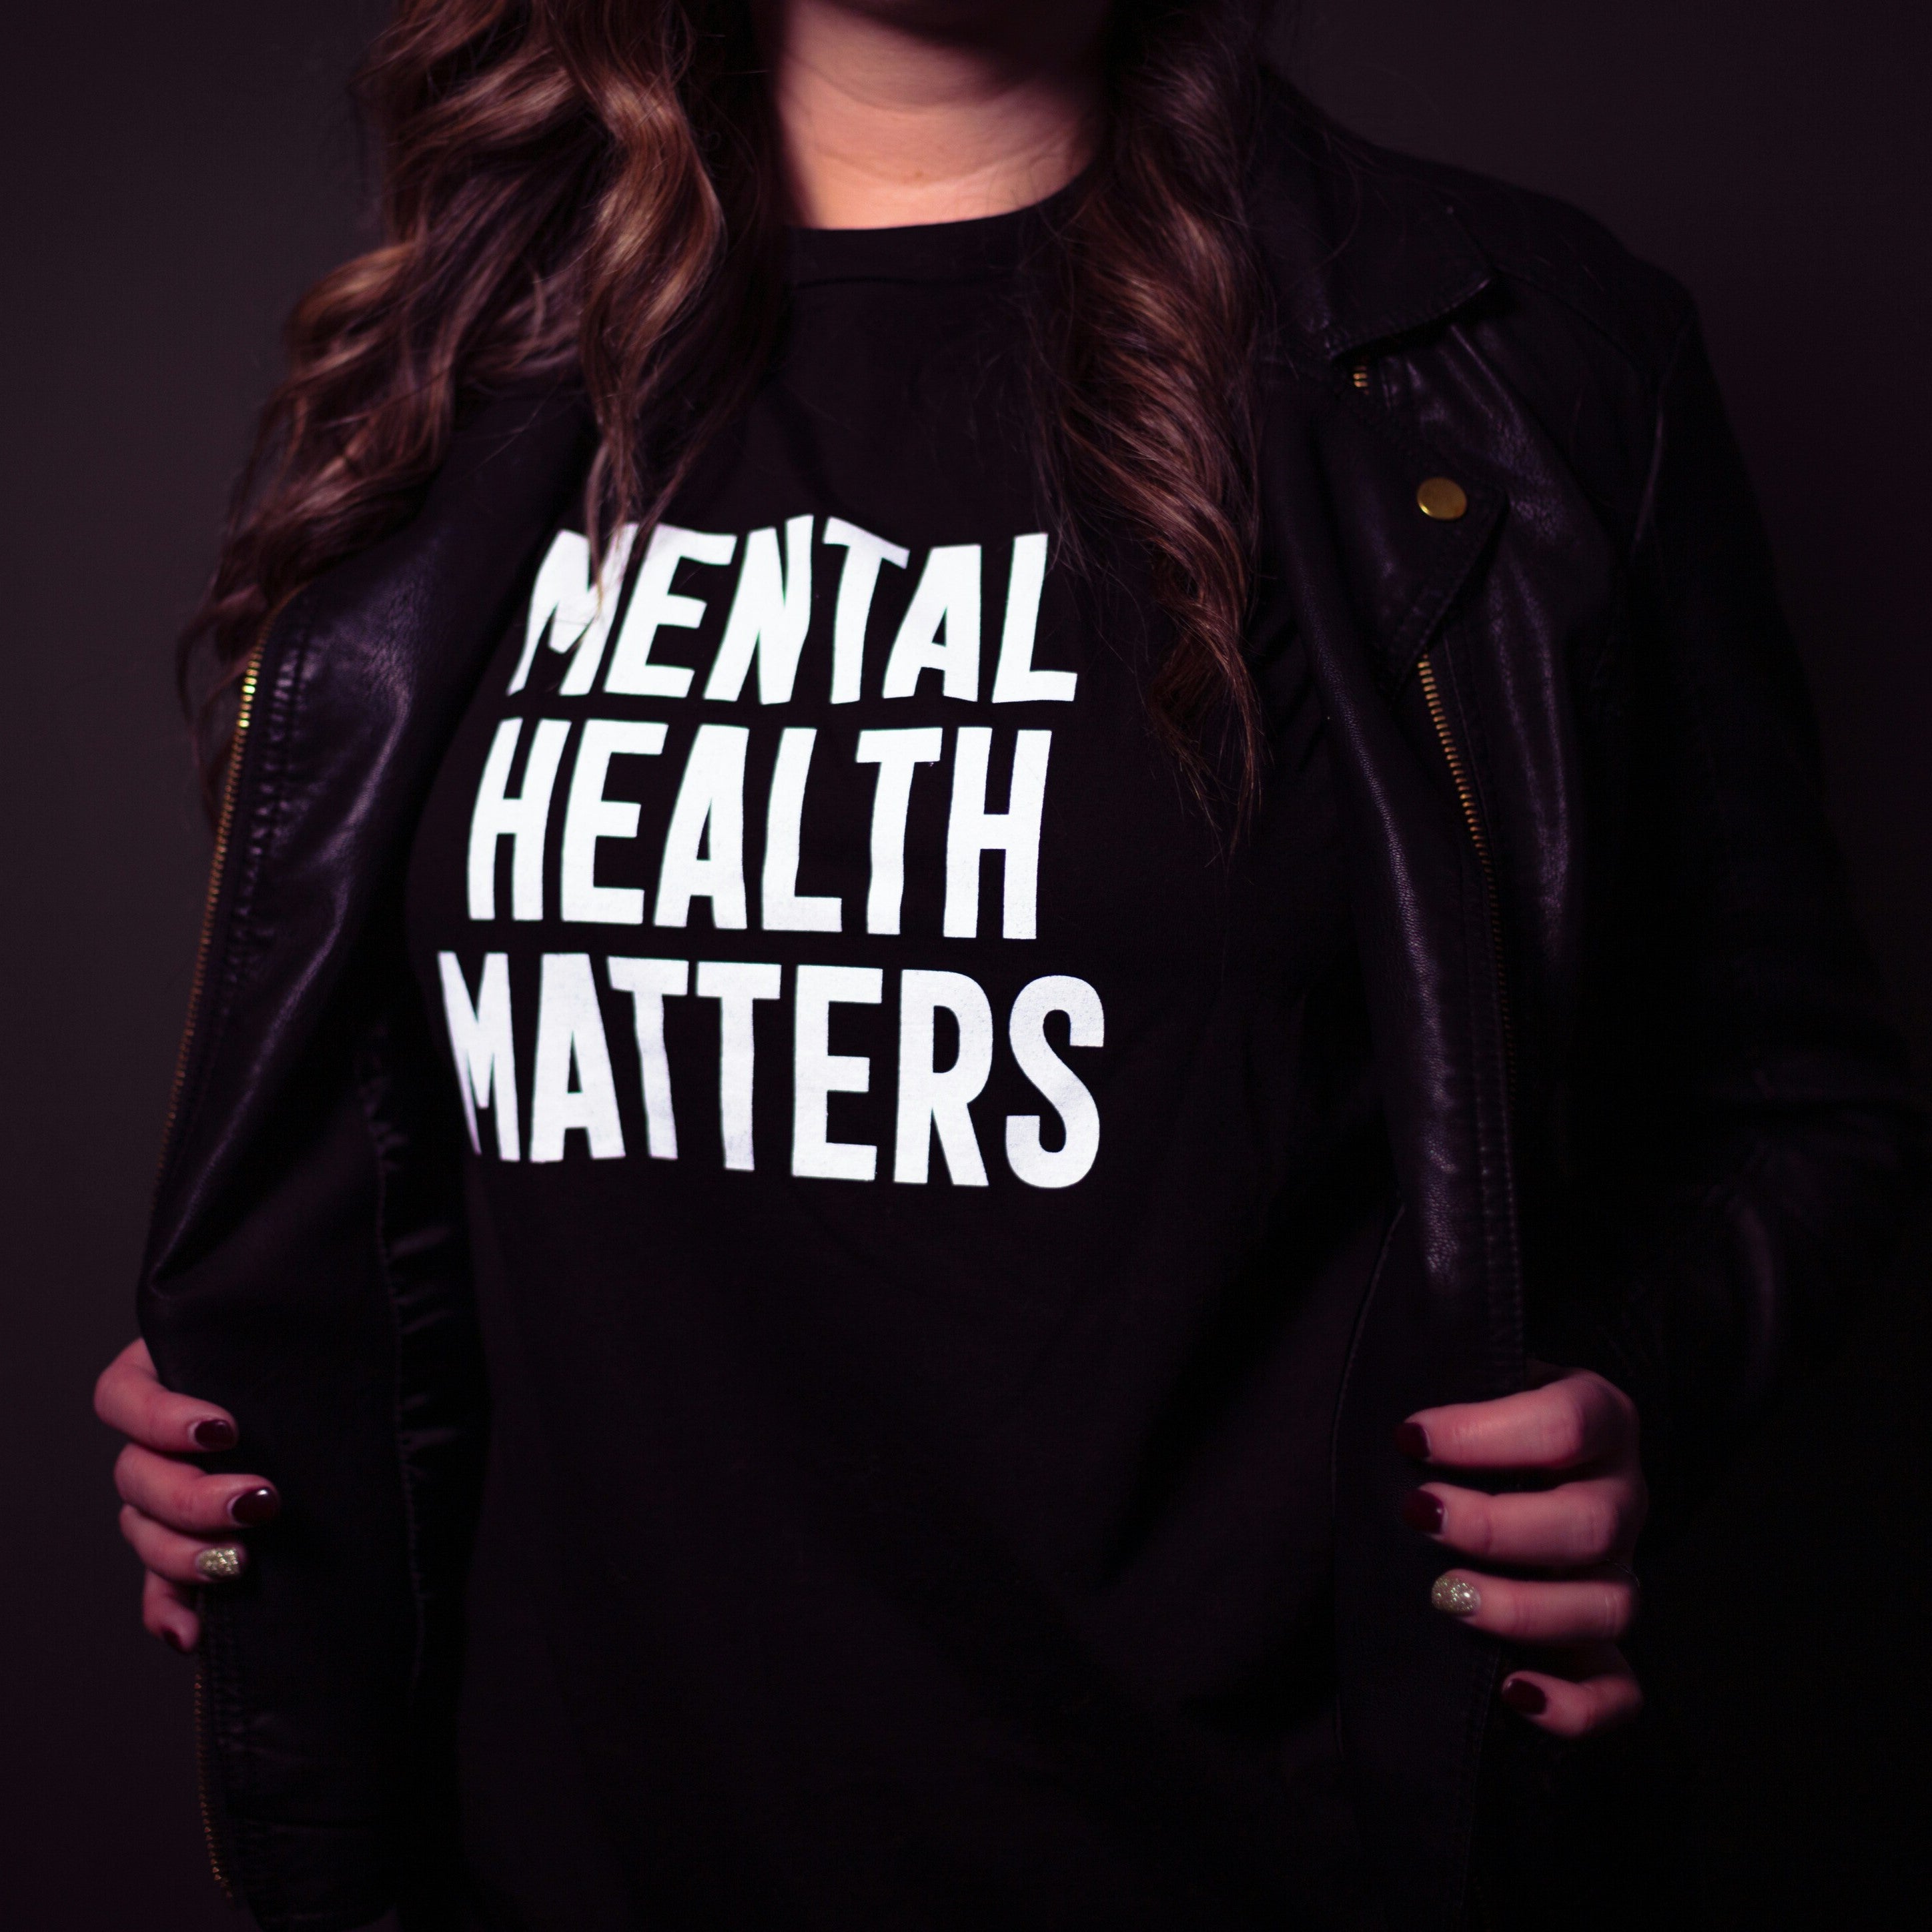 woman wearing black t-shirt with statement:  Mental Health Matters